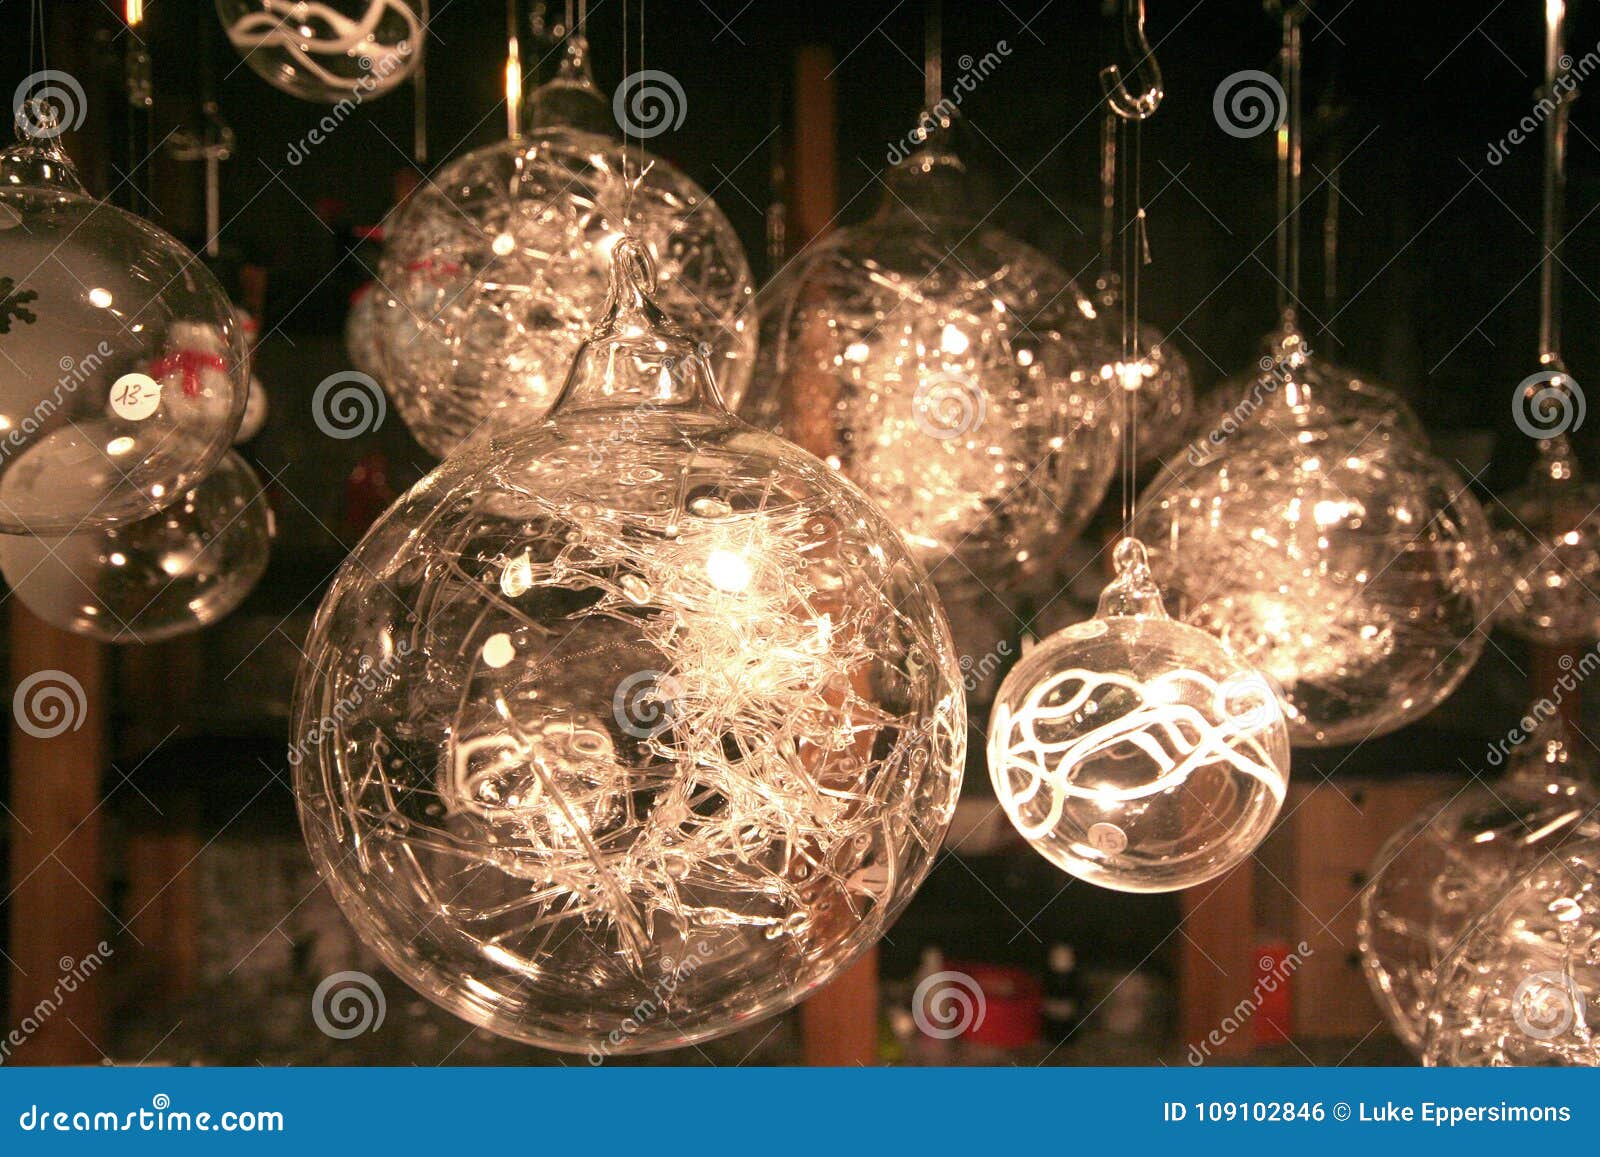 Close Up Of Decorative Crystal Balls Hanging From Ceiling